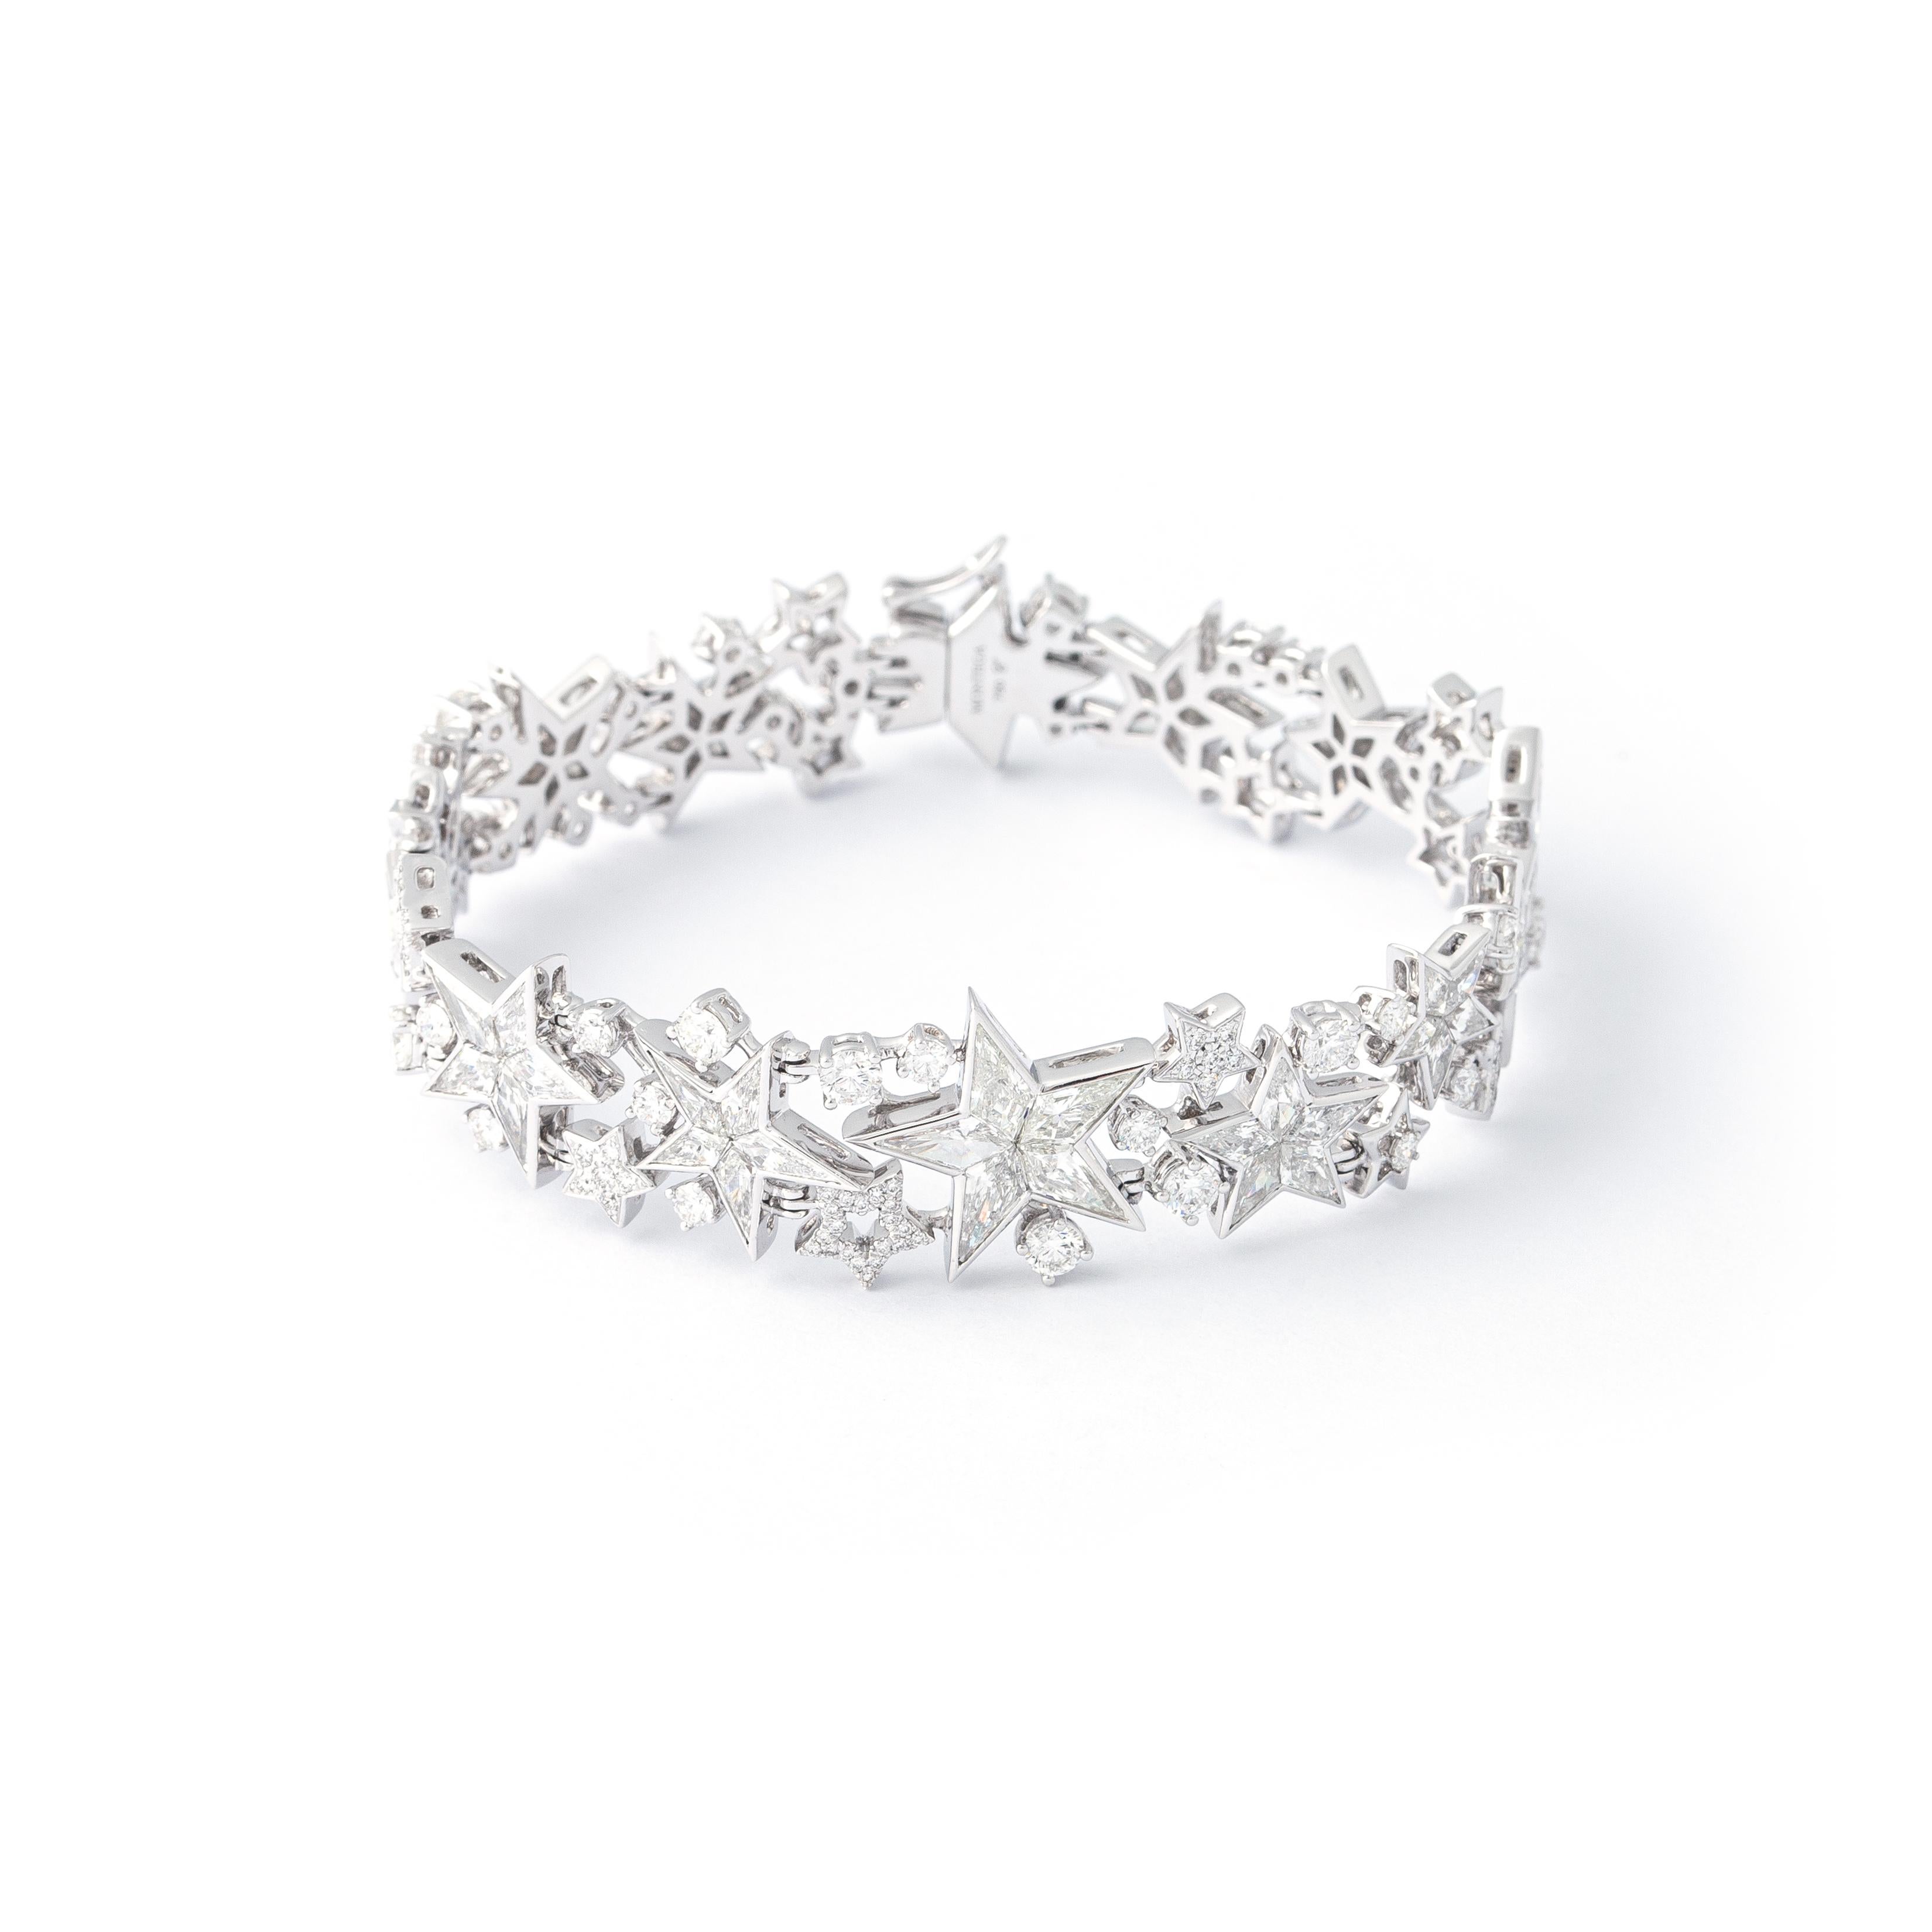 Bracelet in 18kt white gold set with 149 diamonds 3.57 cts and 65 stars diamonds 8.34 ctsds 1.01 cts.

Length: 18.00 centimeters (7.09 inches).

Total weight: 33.46 grams.

Width : 1.70 centimeters (0.67 inches).